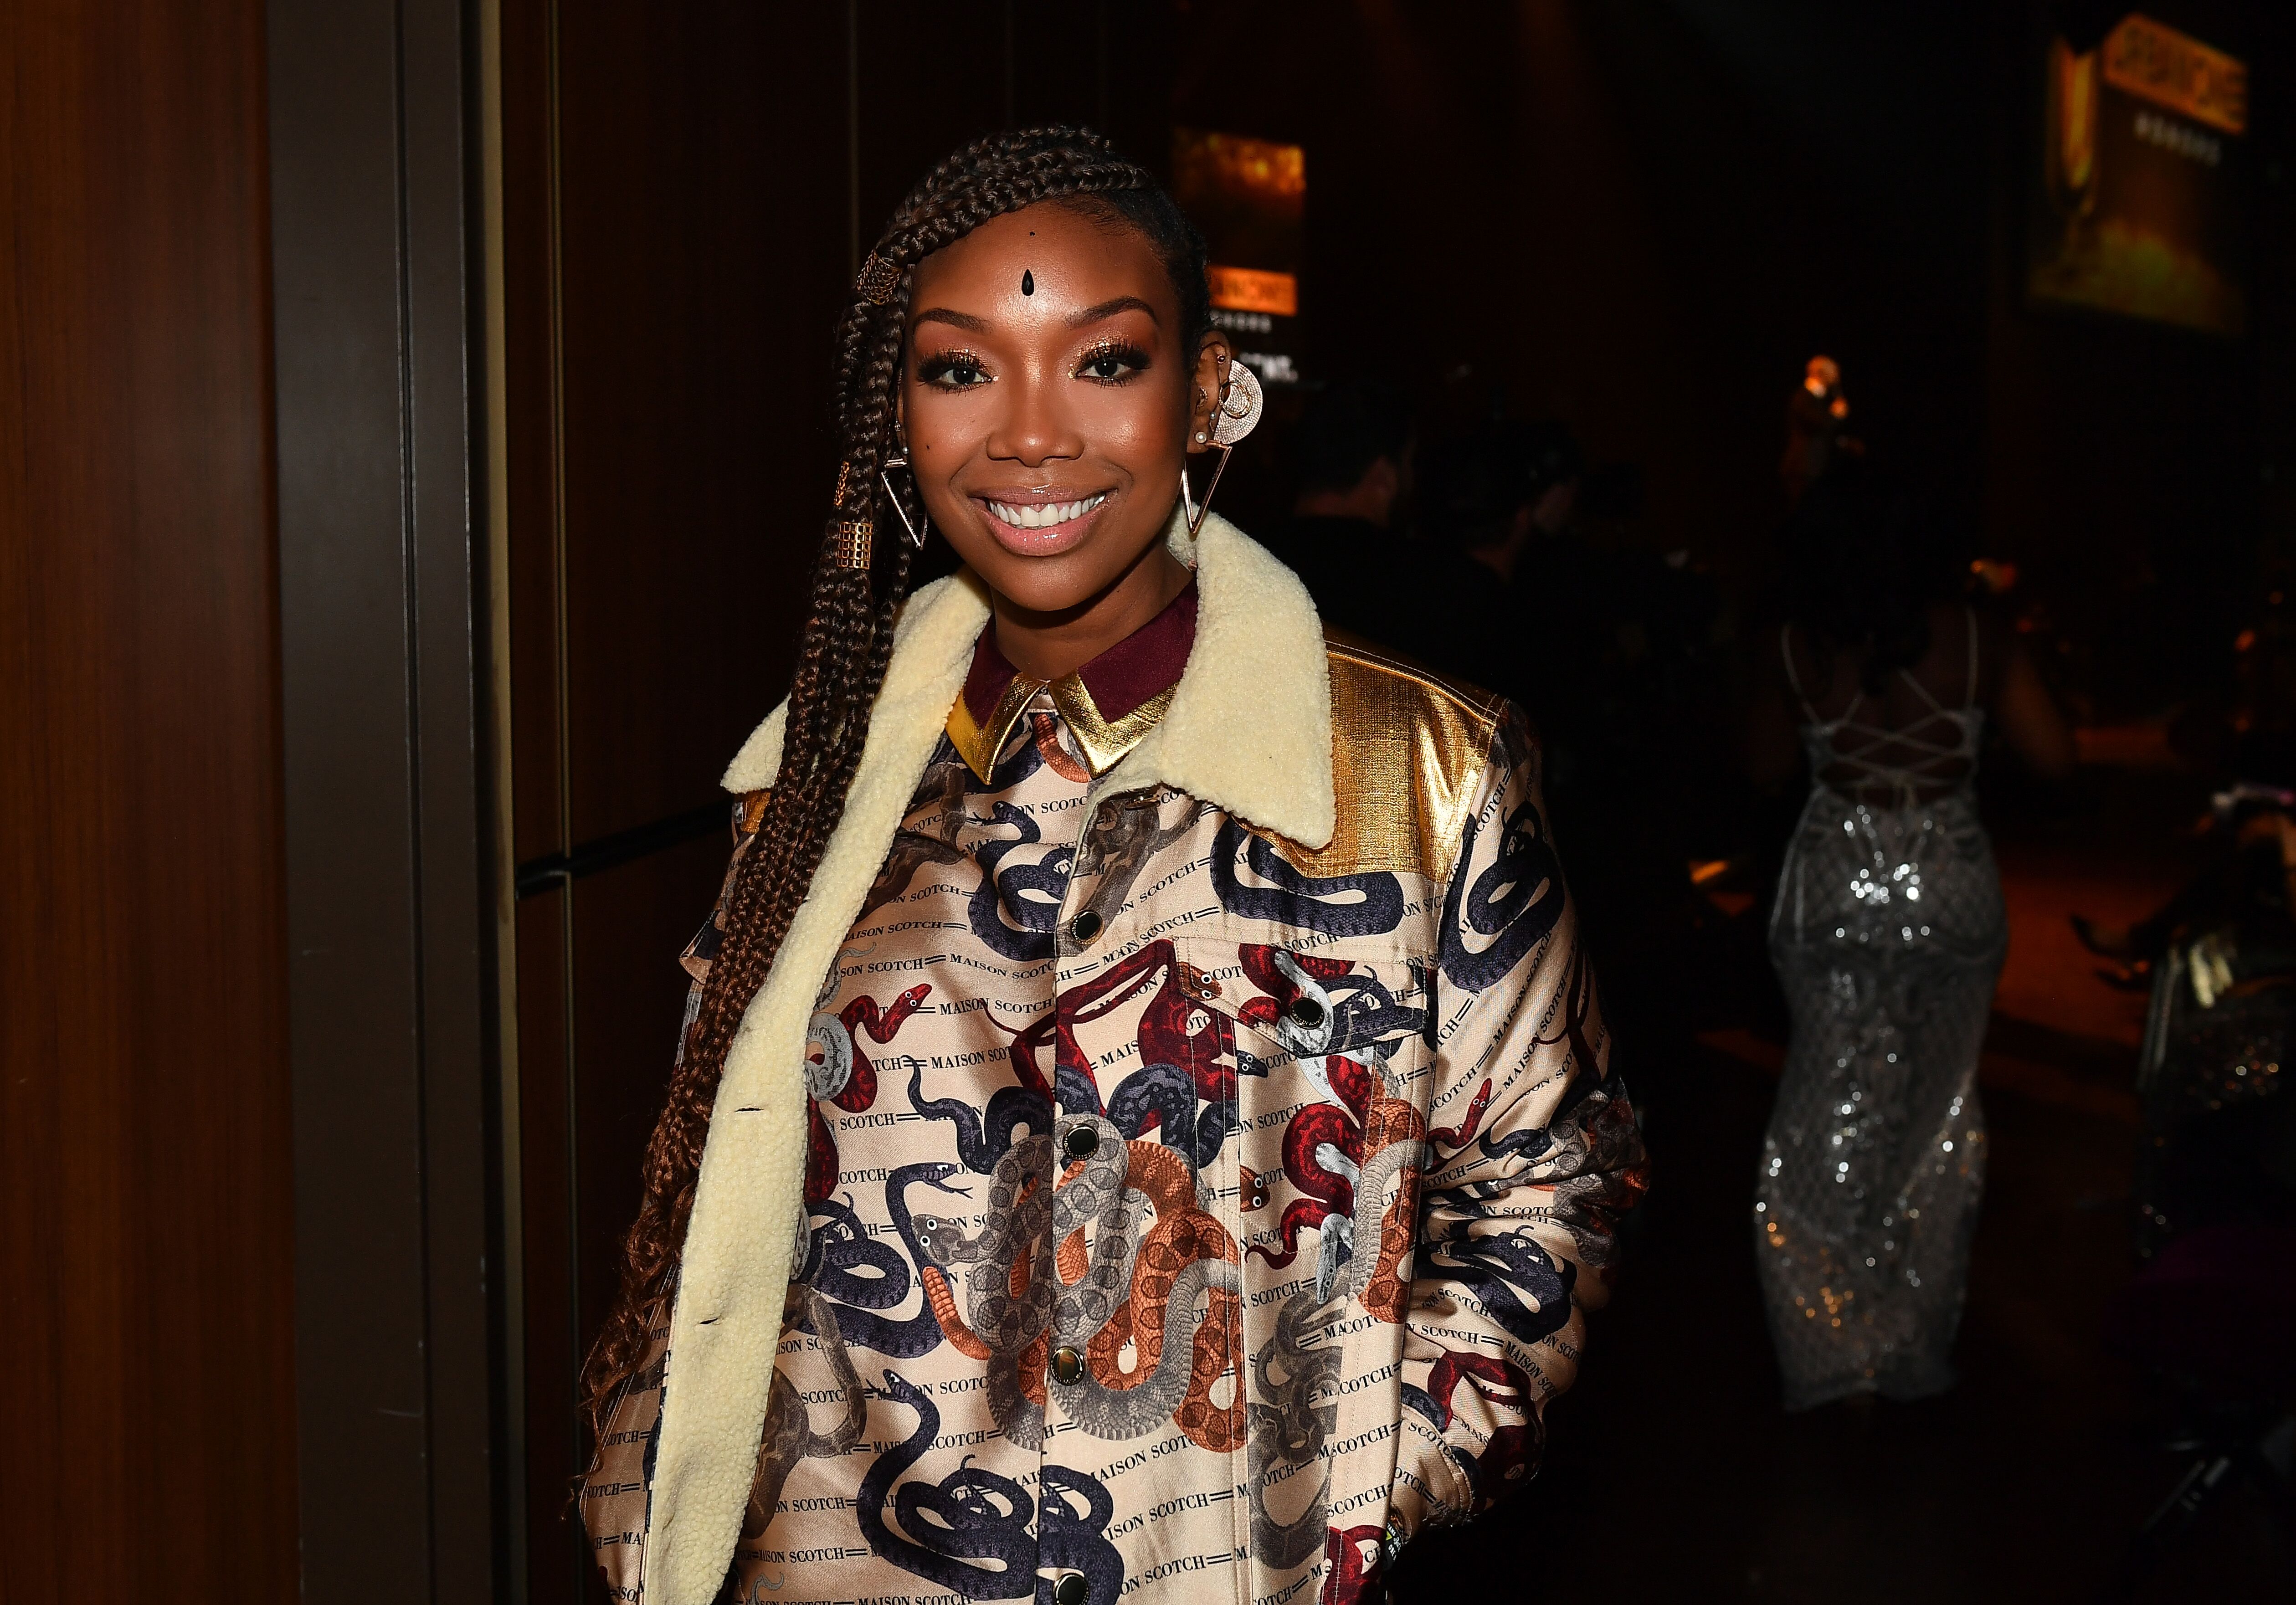 Singer Brandy attends 2019 Urban One Honors at MGM National Harbor on December 05, 2019 | Photo: Getty Images